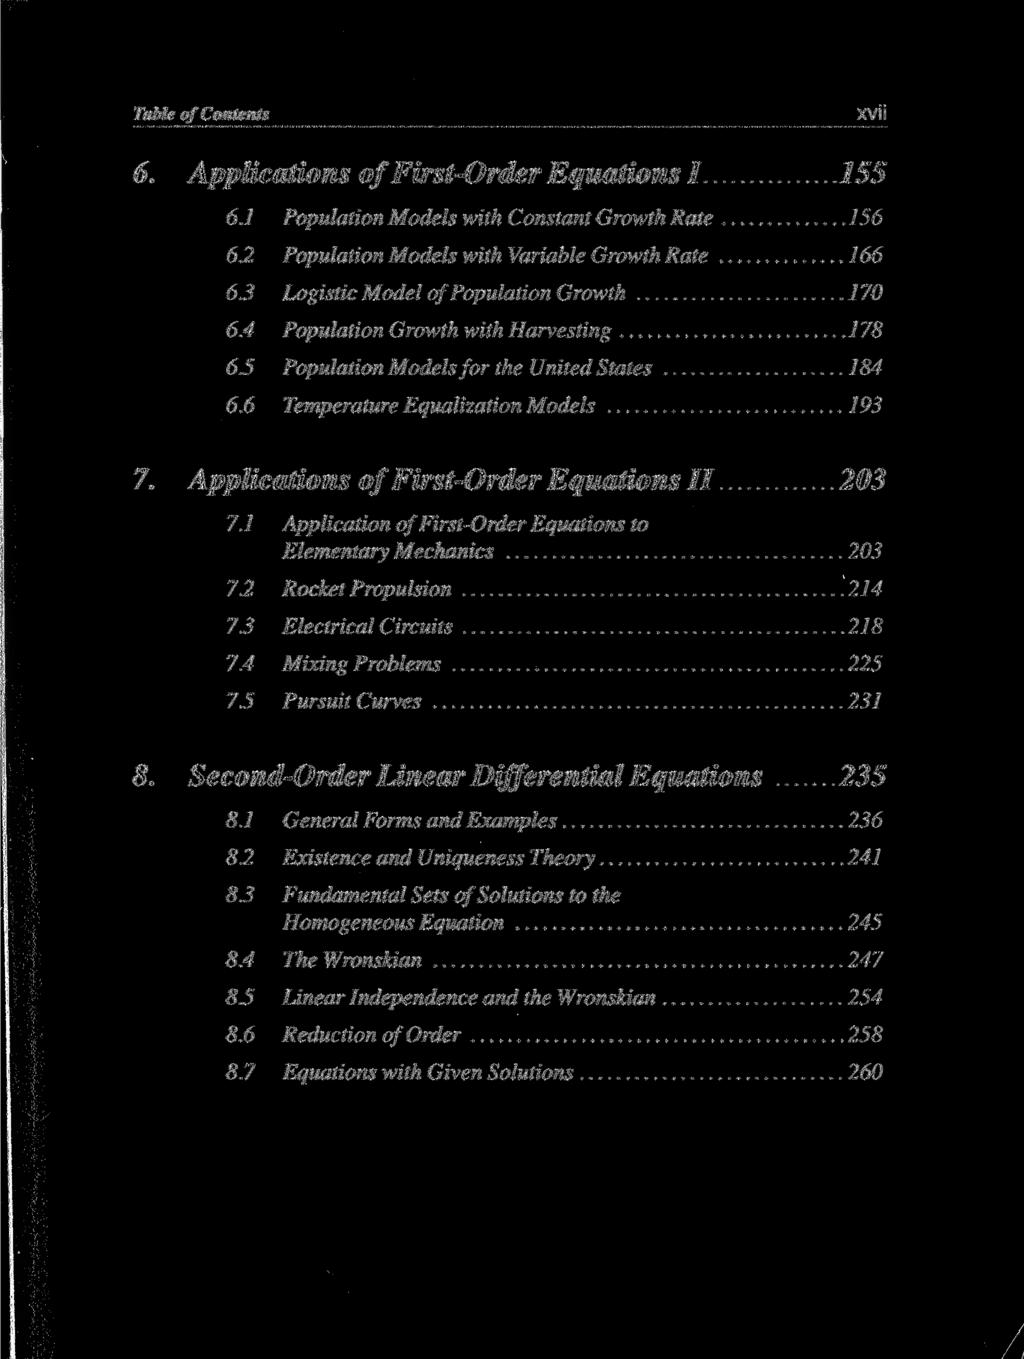 Table of Contents XVM 6. Applications of First-Order Equations 1 155 6.1 Population Models with Constant Growth Rate 156 6.2 Population Models with Variable Growth Rate 166 6.